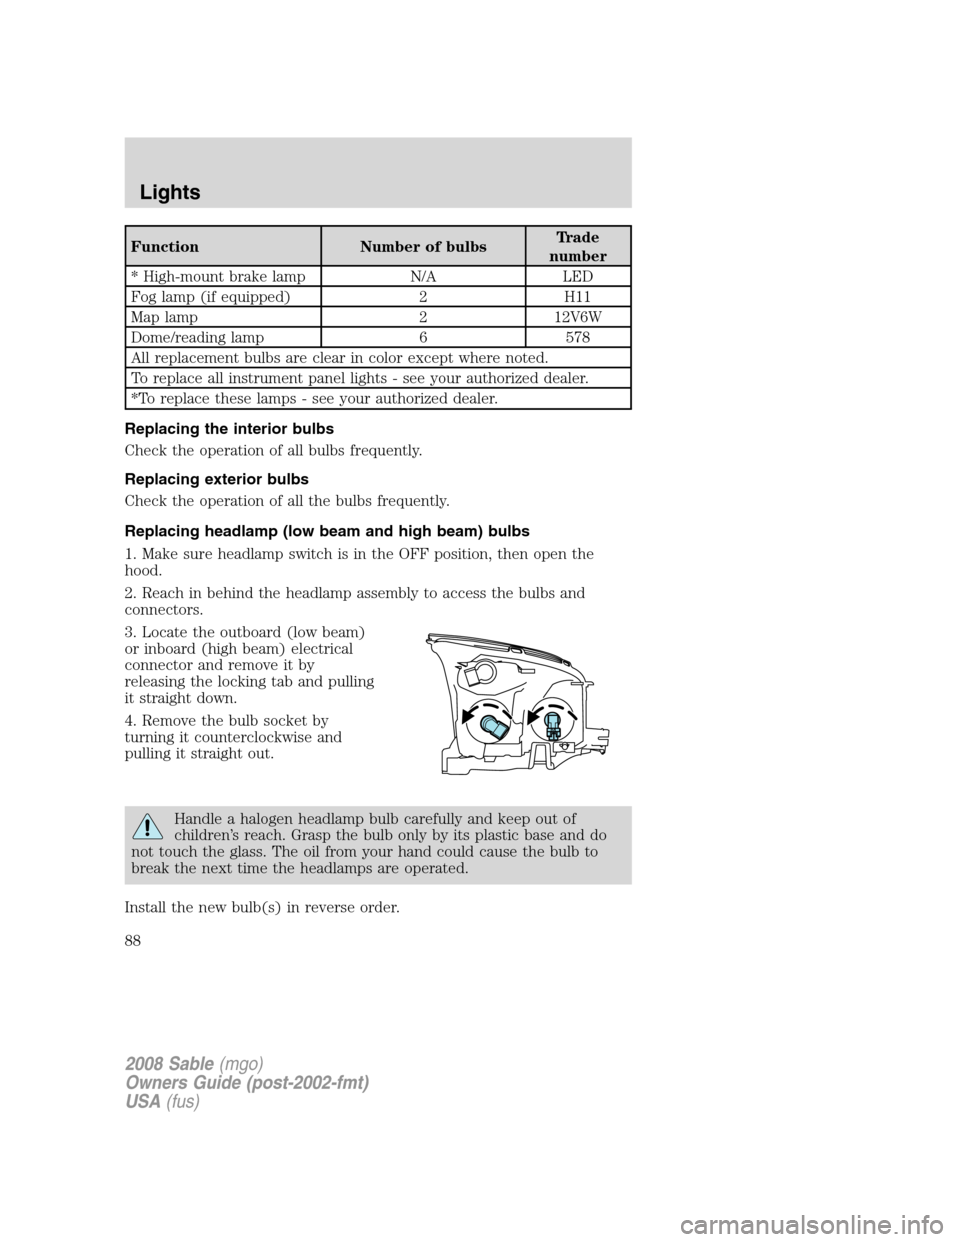 Mercury Sable 2008  Owners Manuals Function Number of bulbsTrade
number
* High-mount brake lamp N/A LED
Fog lamp (if equipped) 2 H11
Map lamp 2 12V6W
Dome/reading lamp 6 578
All replacement bulbs are clear in color except where noted.
